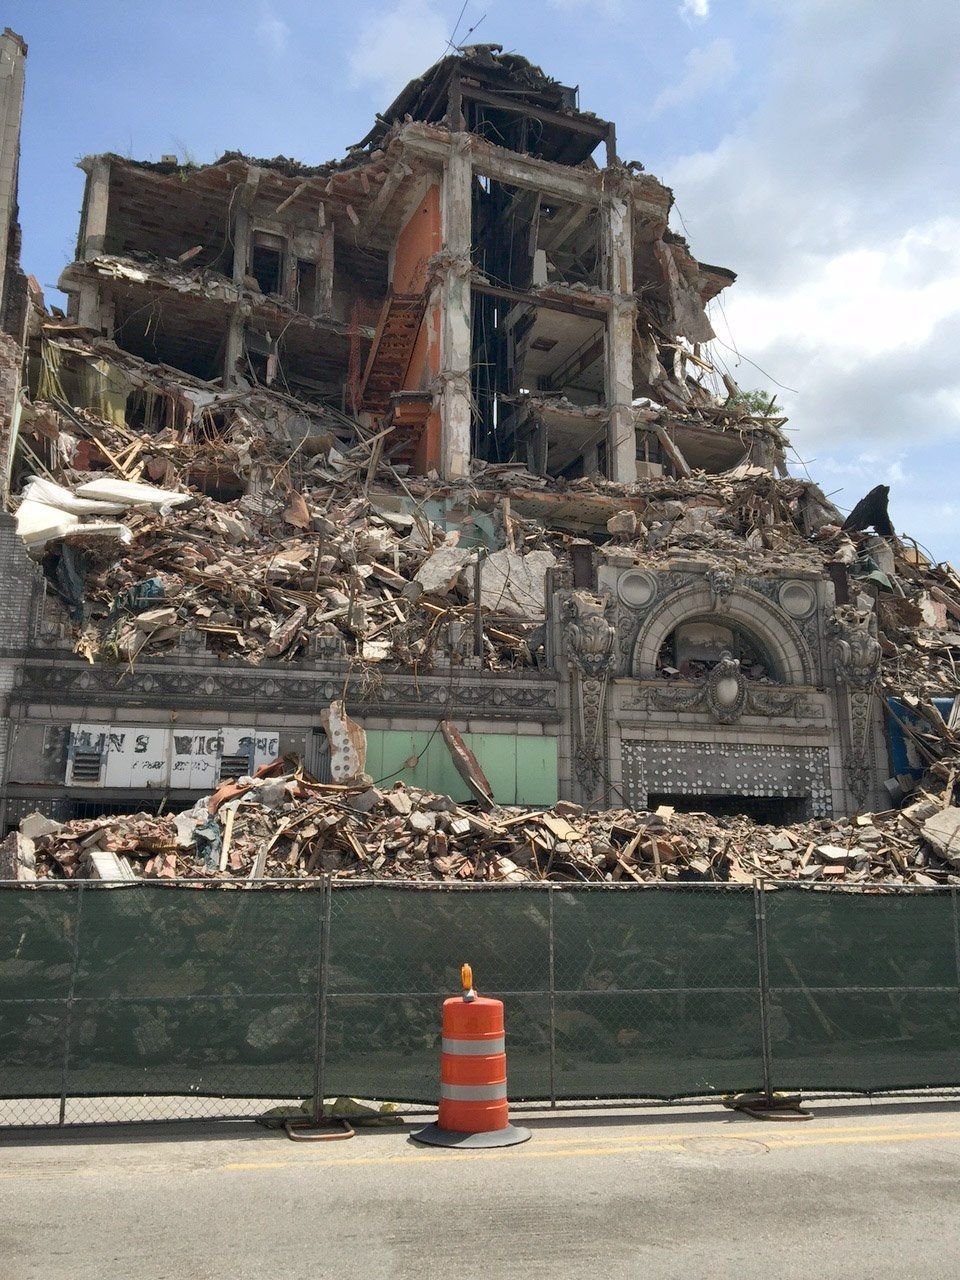 Landmark Murphy Building in East St. Louis largely reduced to rubble | Illinois | 0